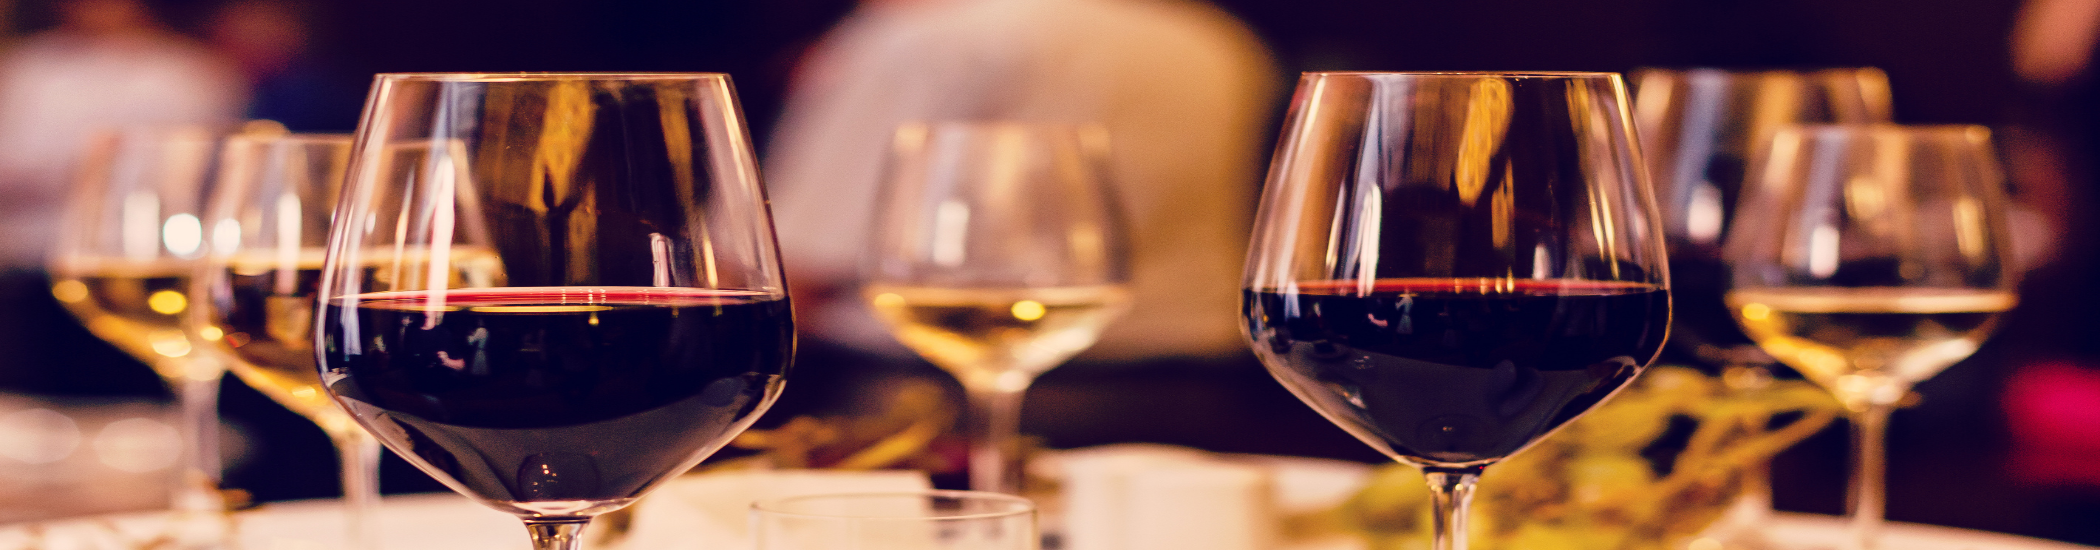 Photo of two glasses of red wine in the foreground with five glasses of white wine in the background.